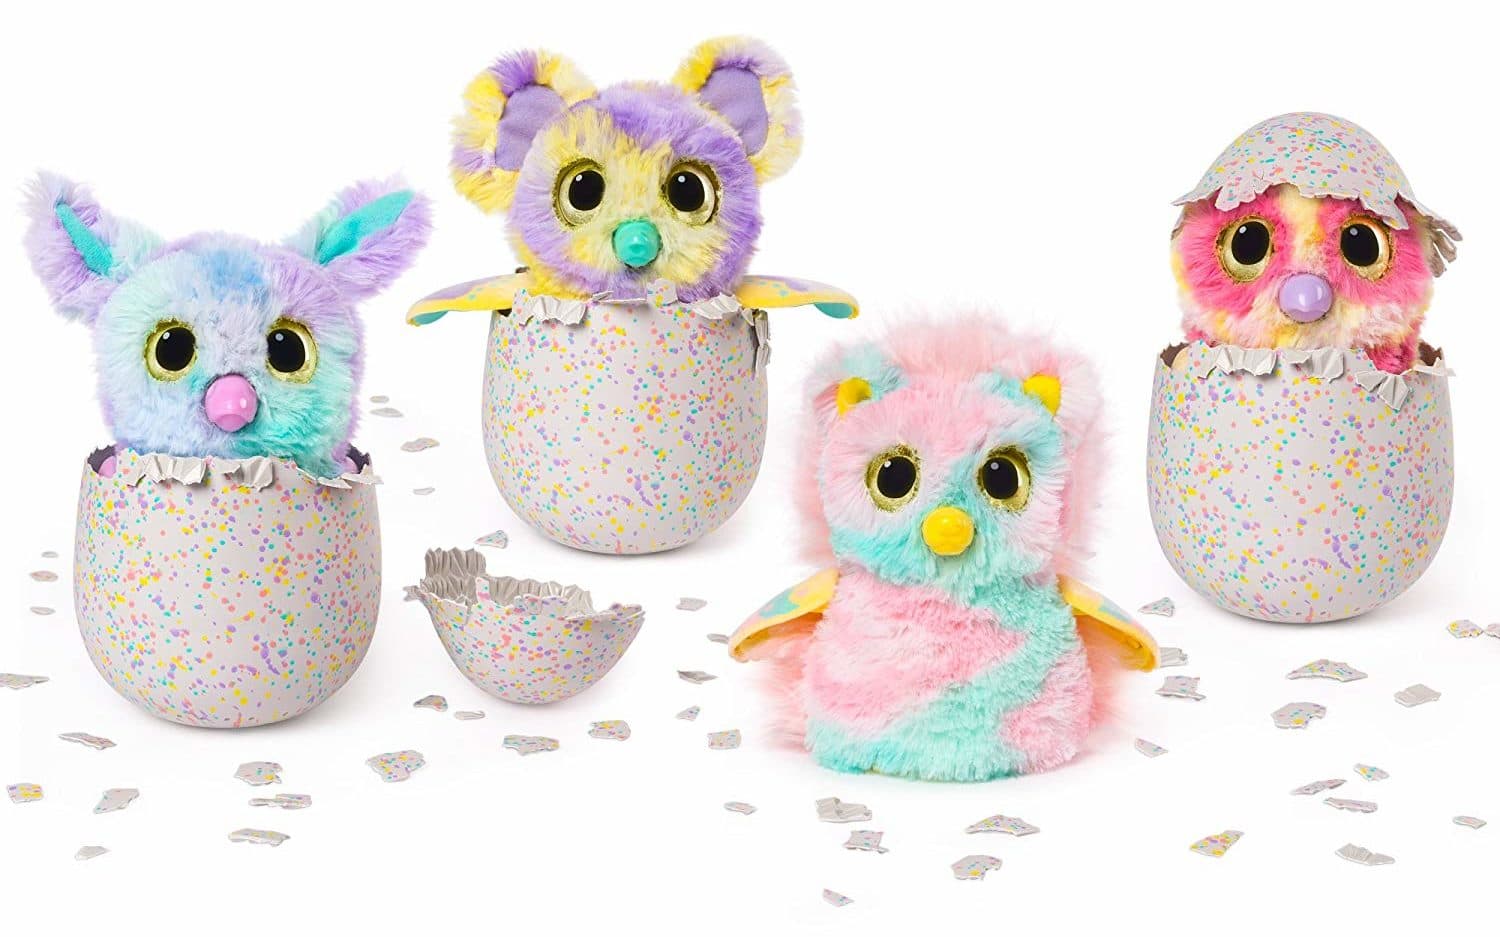 New Hatchimals Mystery 2018 - Where to Buy Fluffy Cloud Cove Hatchimal